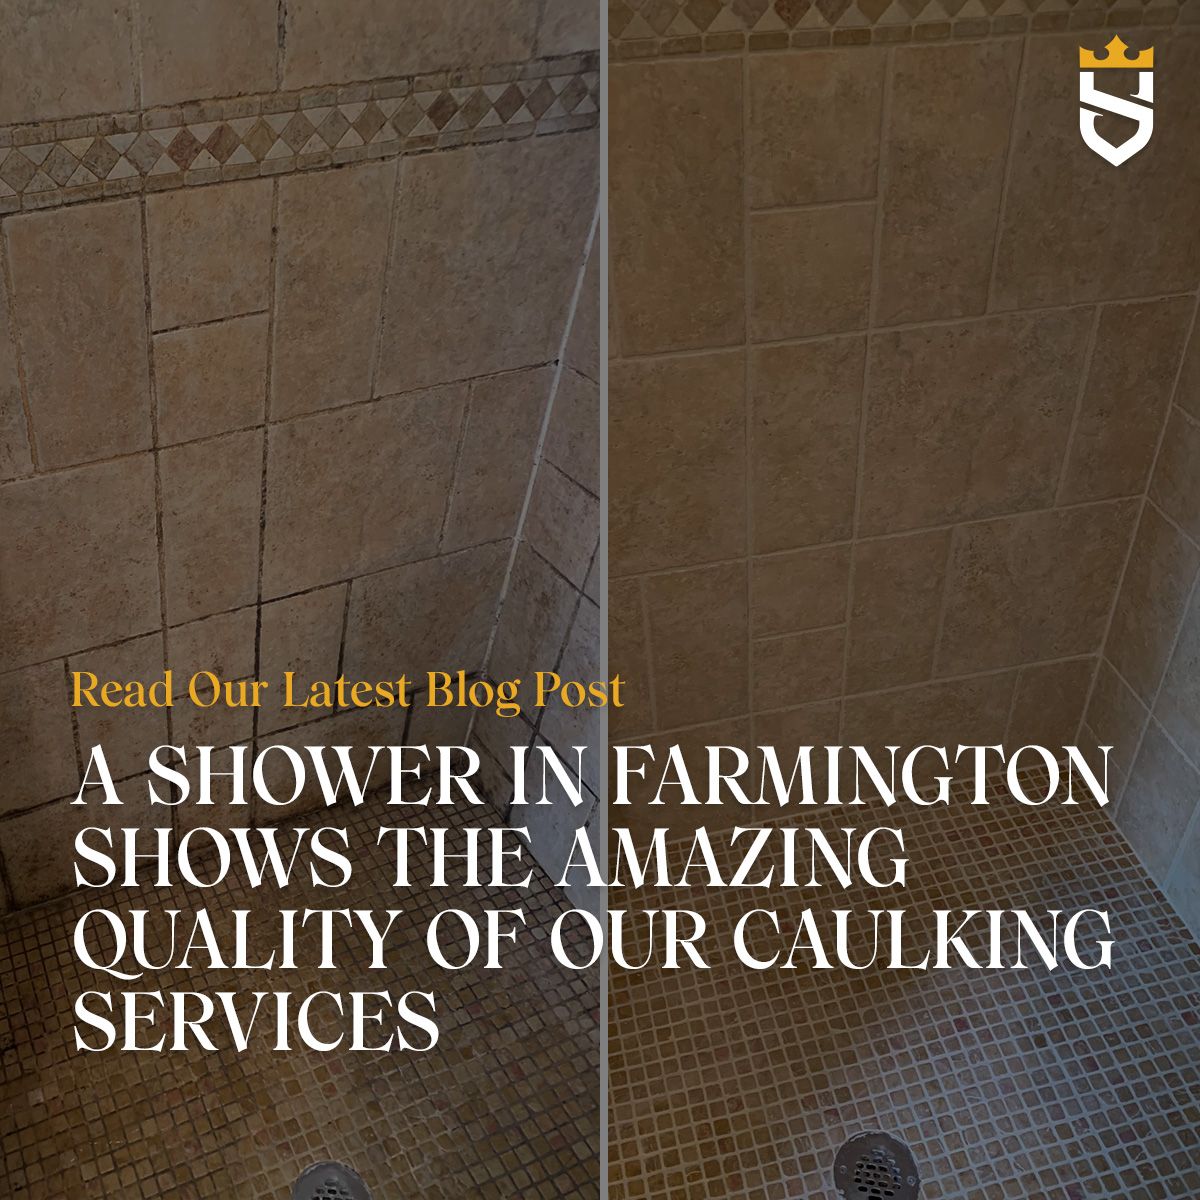 A Shower in Farmington Shows the Amazing Quality of Our Caulking Services